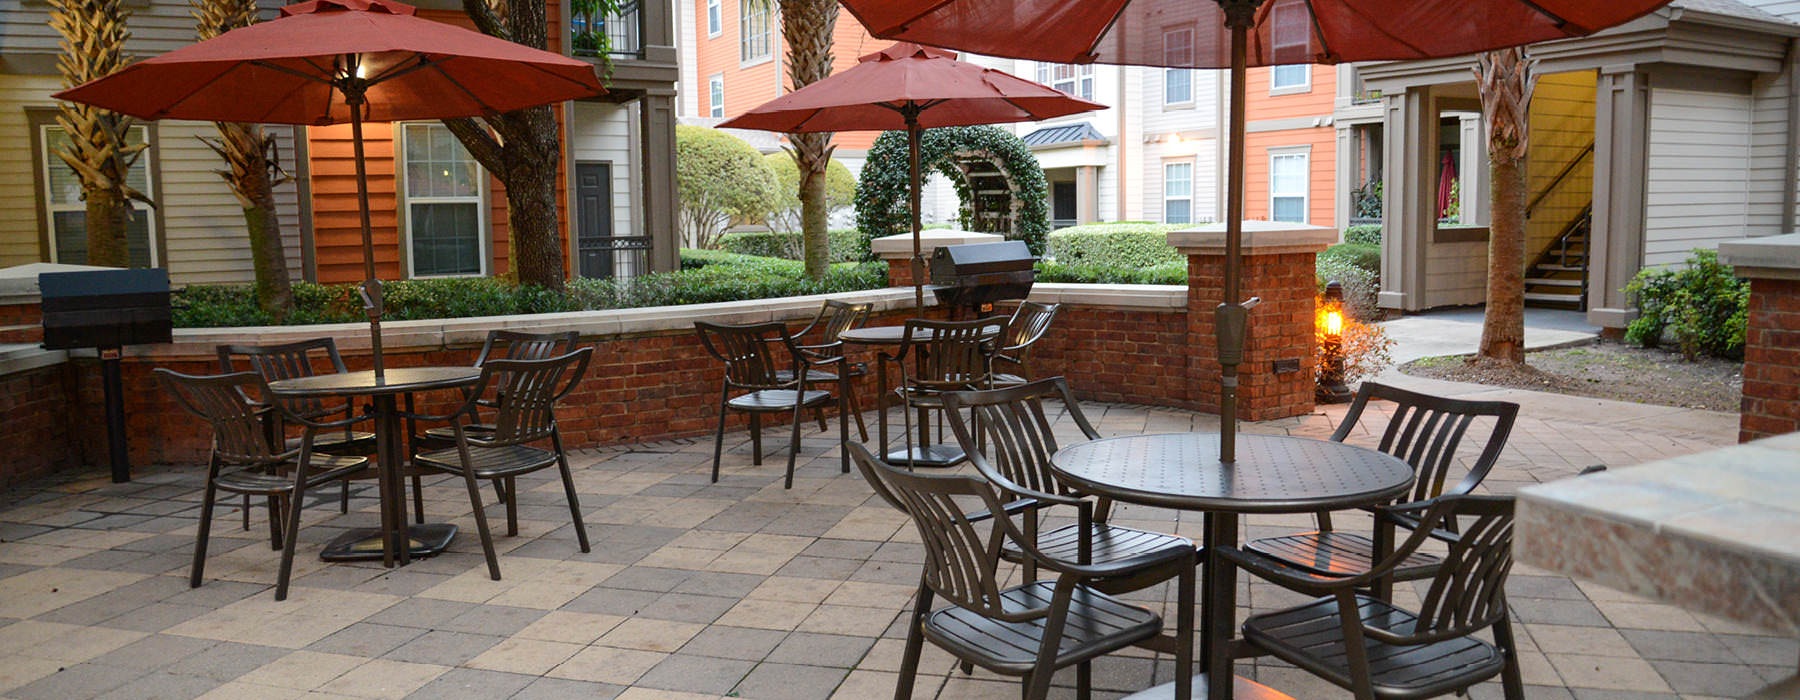 umbrella shaded tables and chairs in grilling area